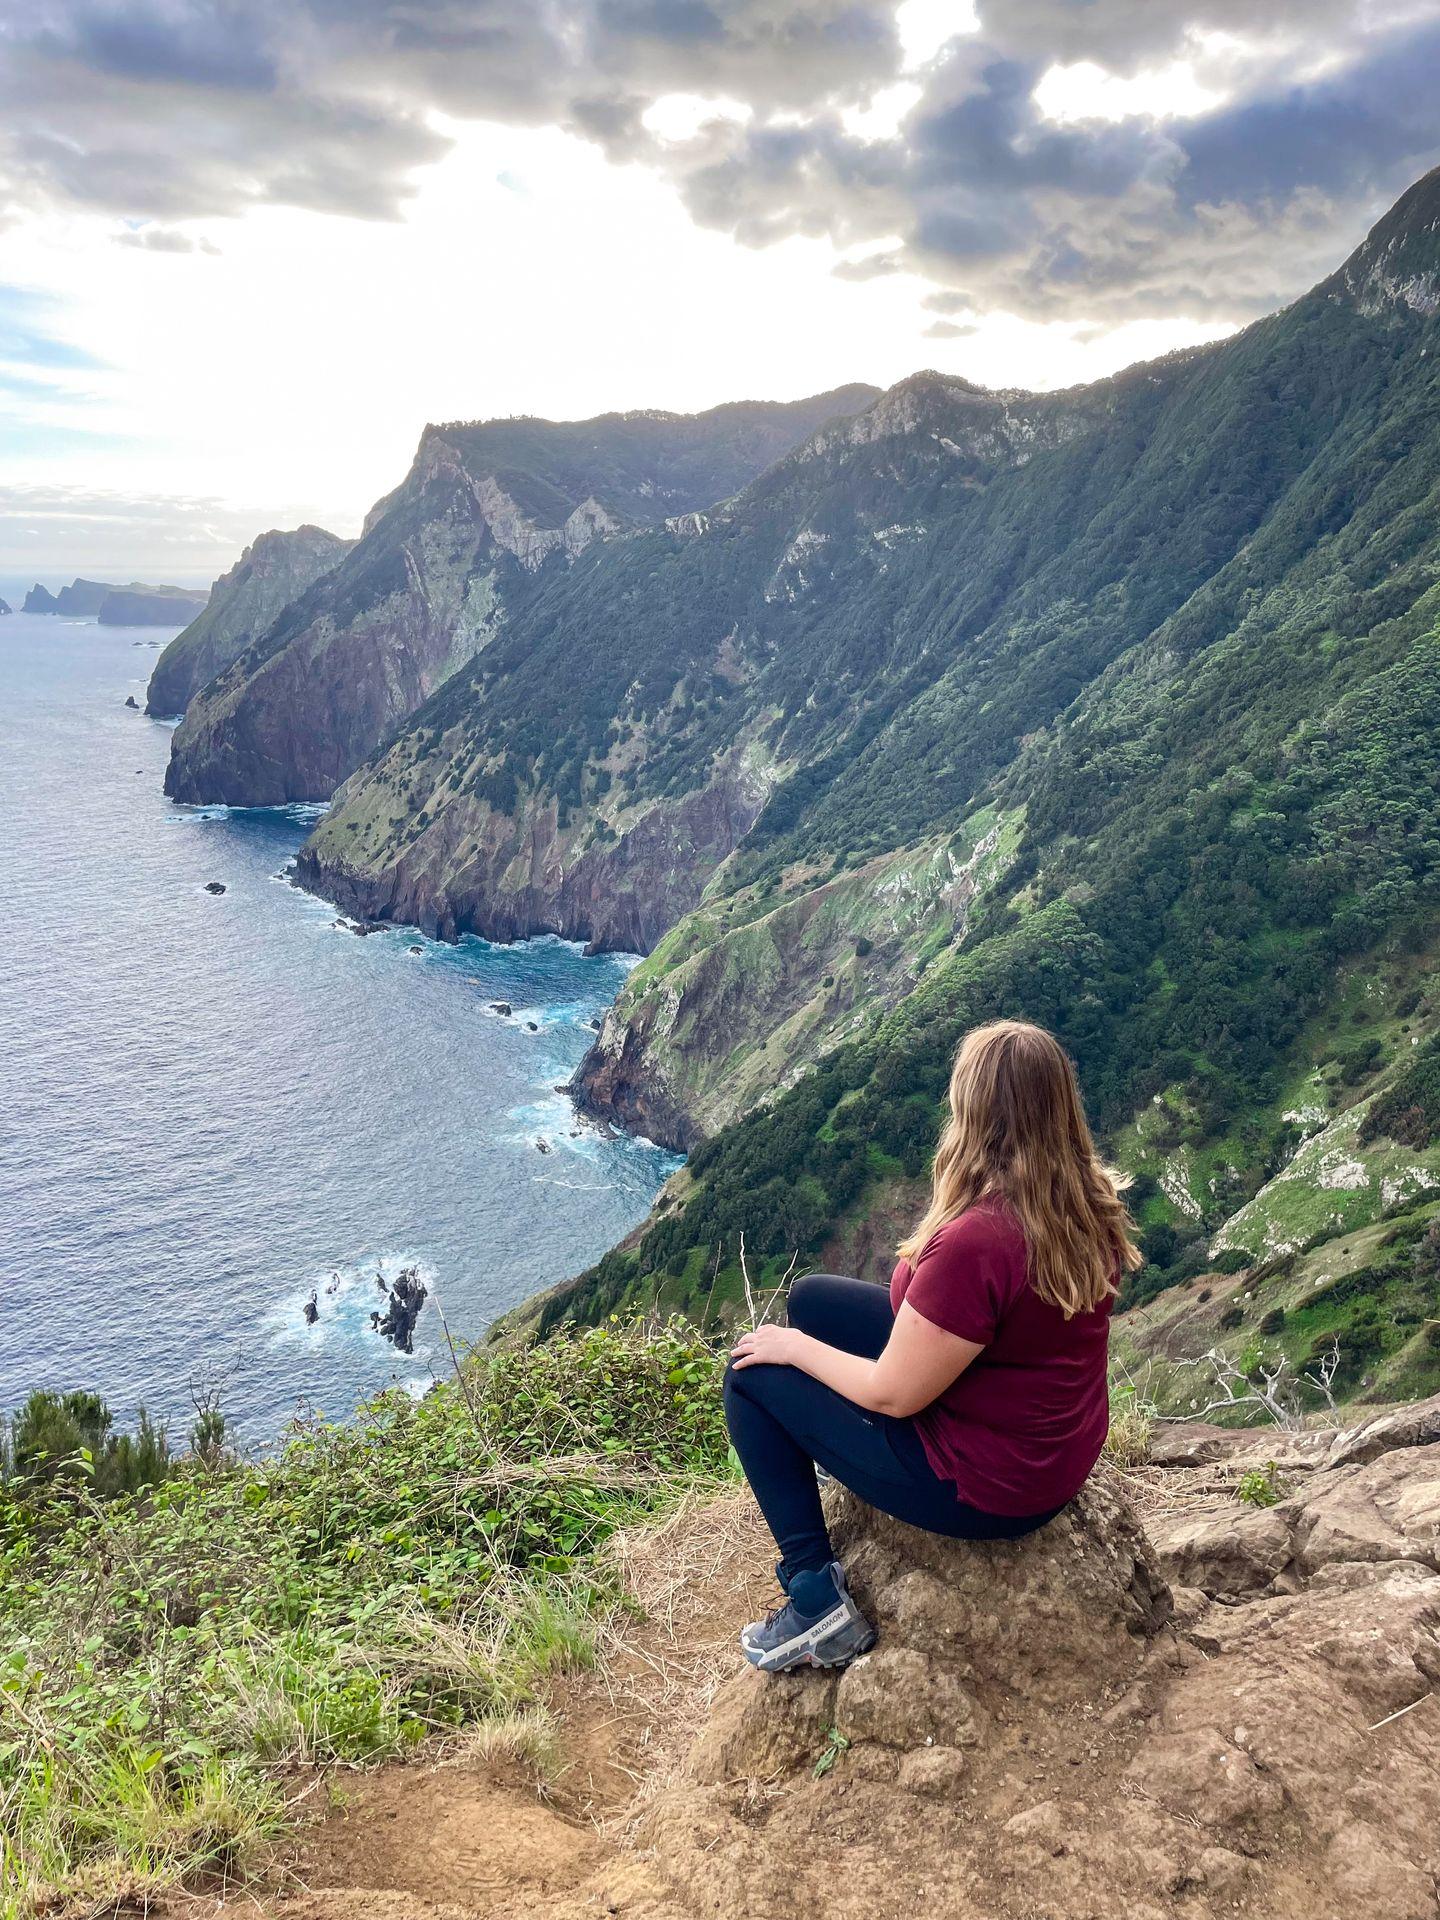 Lydia sitting and looking at the view of the water and coast from the Boca do Risco Trail